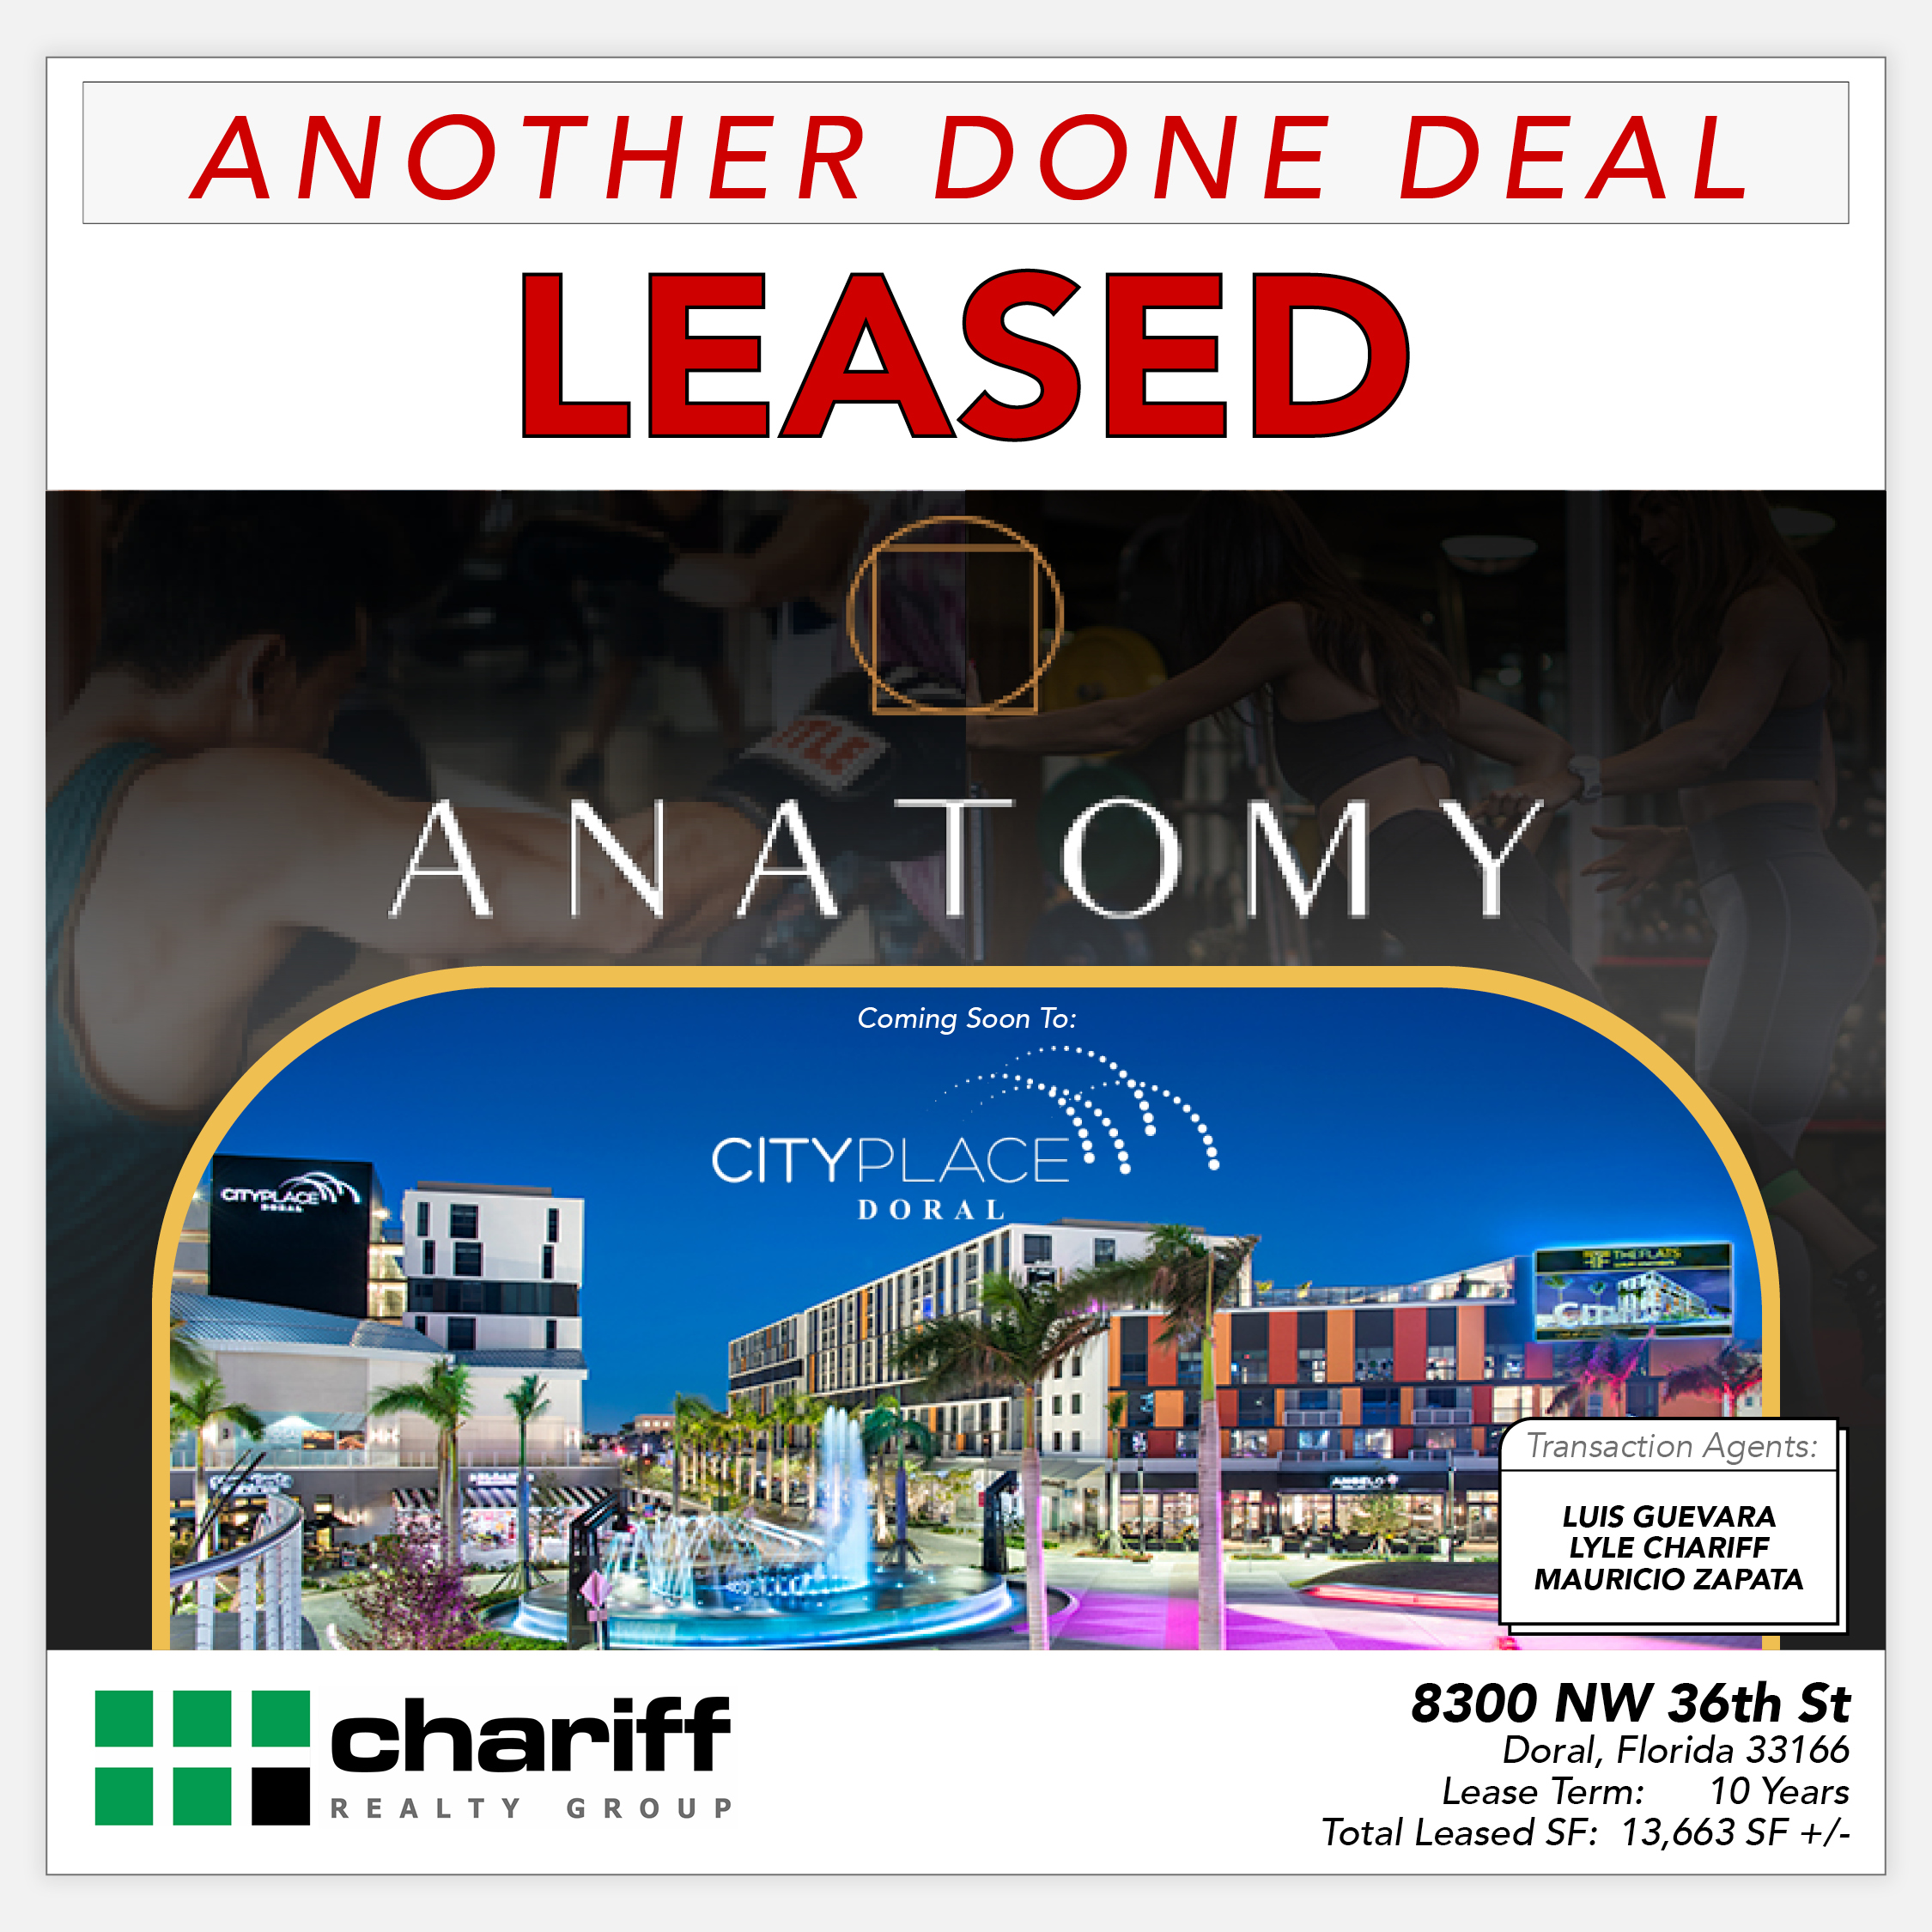 8300 NW 36th St - Another Done Deal- Leased - Doral -Florida - 33166 -Chariff Realty Group